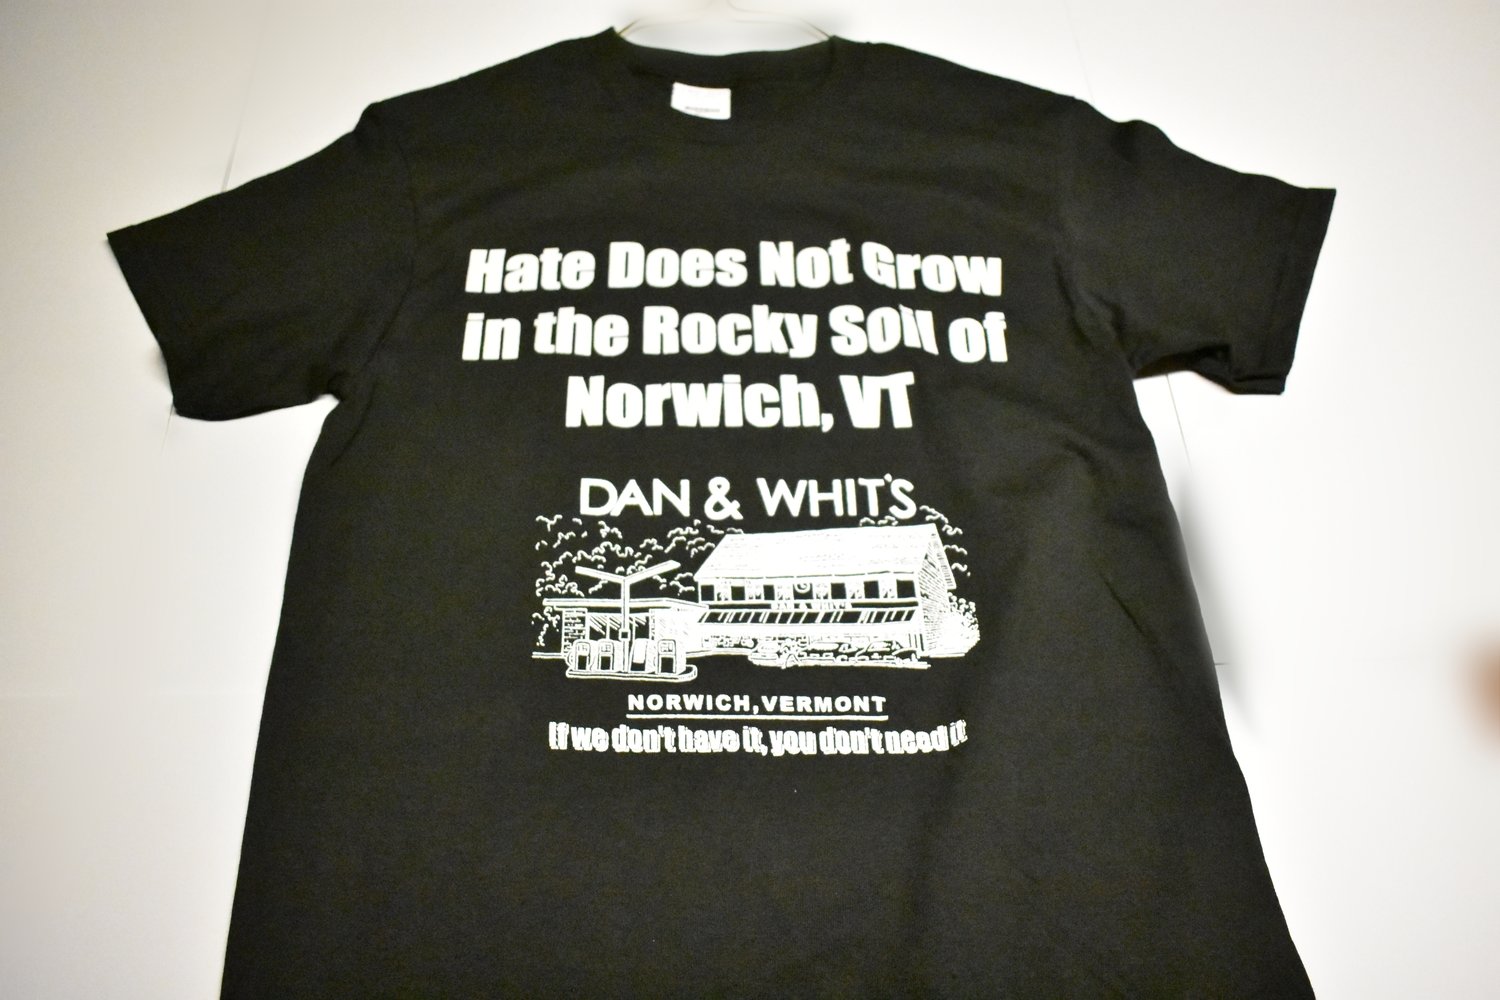 D&W Black T-shirt "Hate Does not grow"